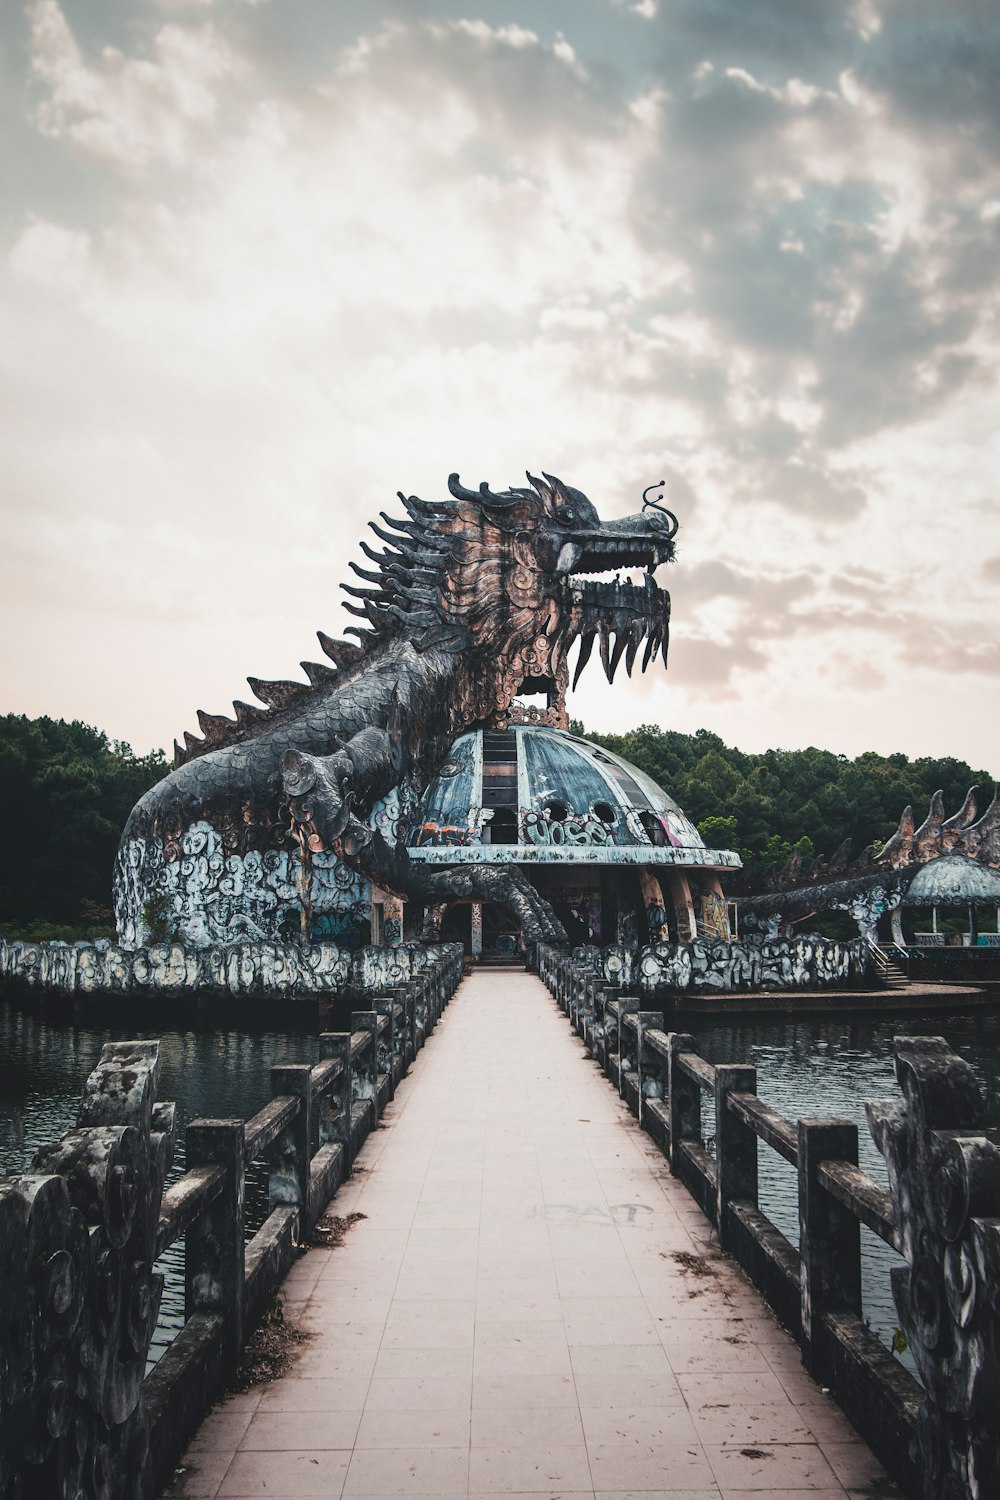 brown dragon statue near body of water during daytime